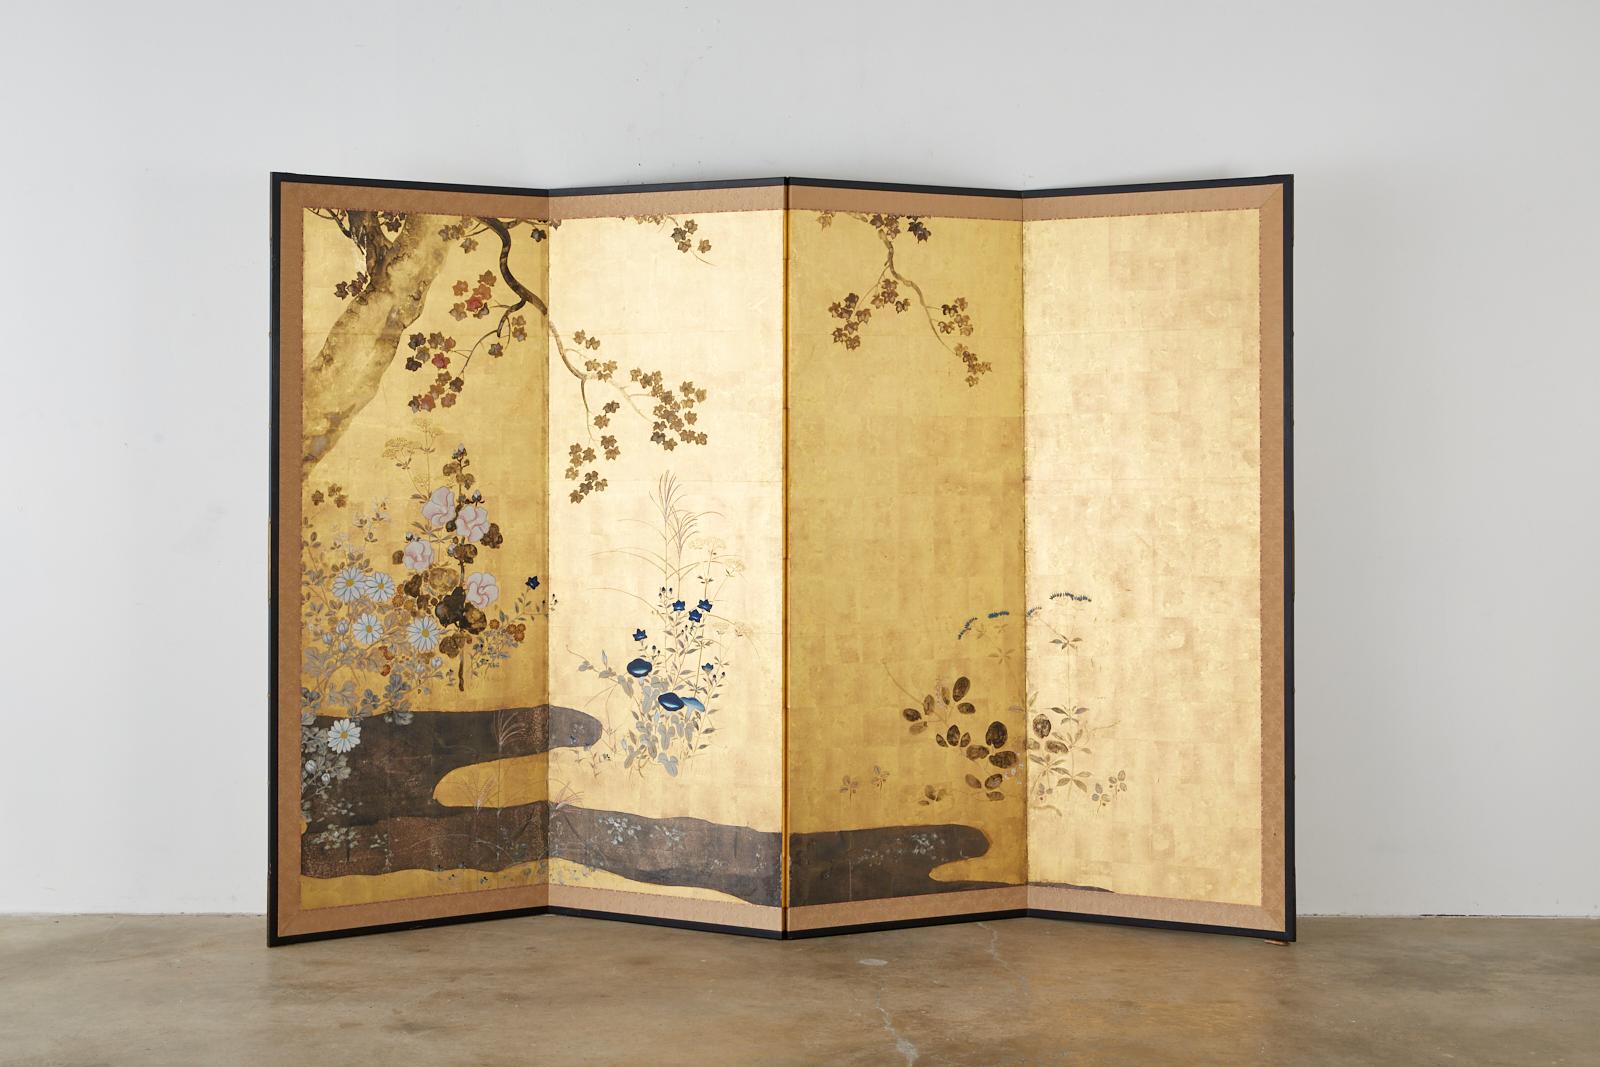 Magnificent Japanese four-panel 19th century Meiji screen. Made in the Rimpa School style depicting a serene floral autumn landscape. Beautifully painted sumi ink and color pigments over gold and silver leaf squares. Delicate flowers of